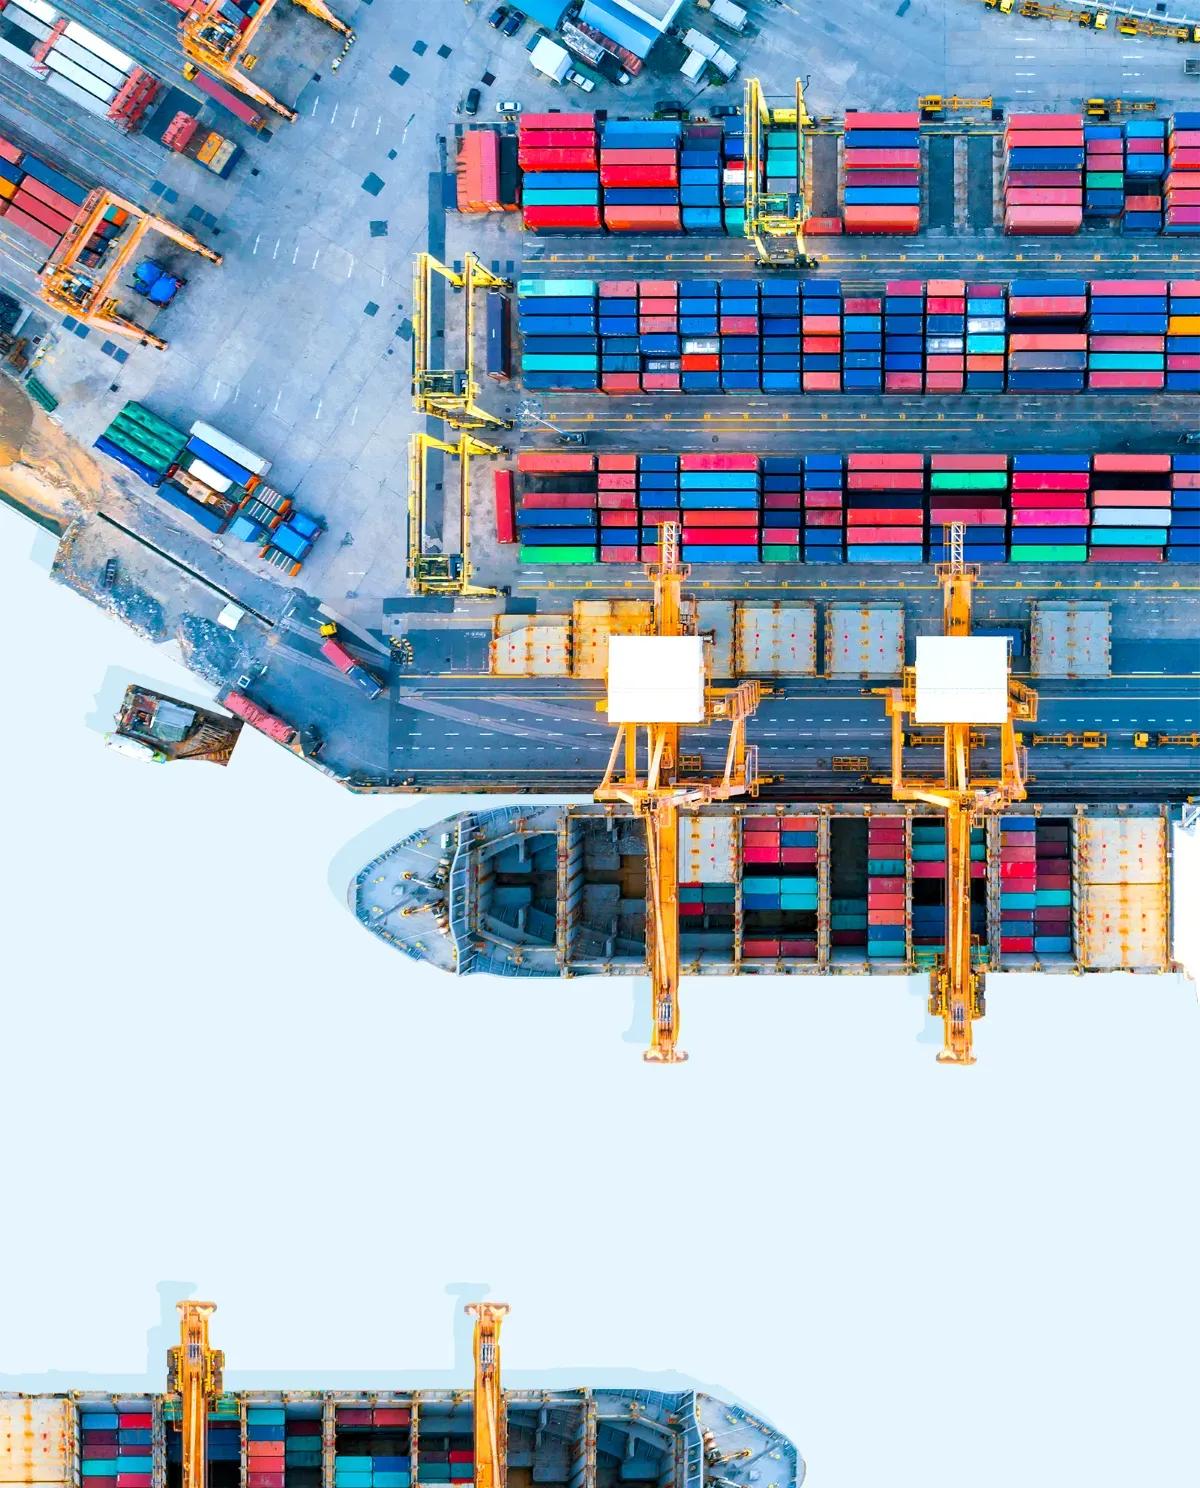 Intelligent solutions to connect the world of logistics